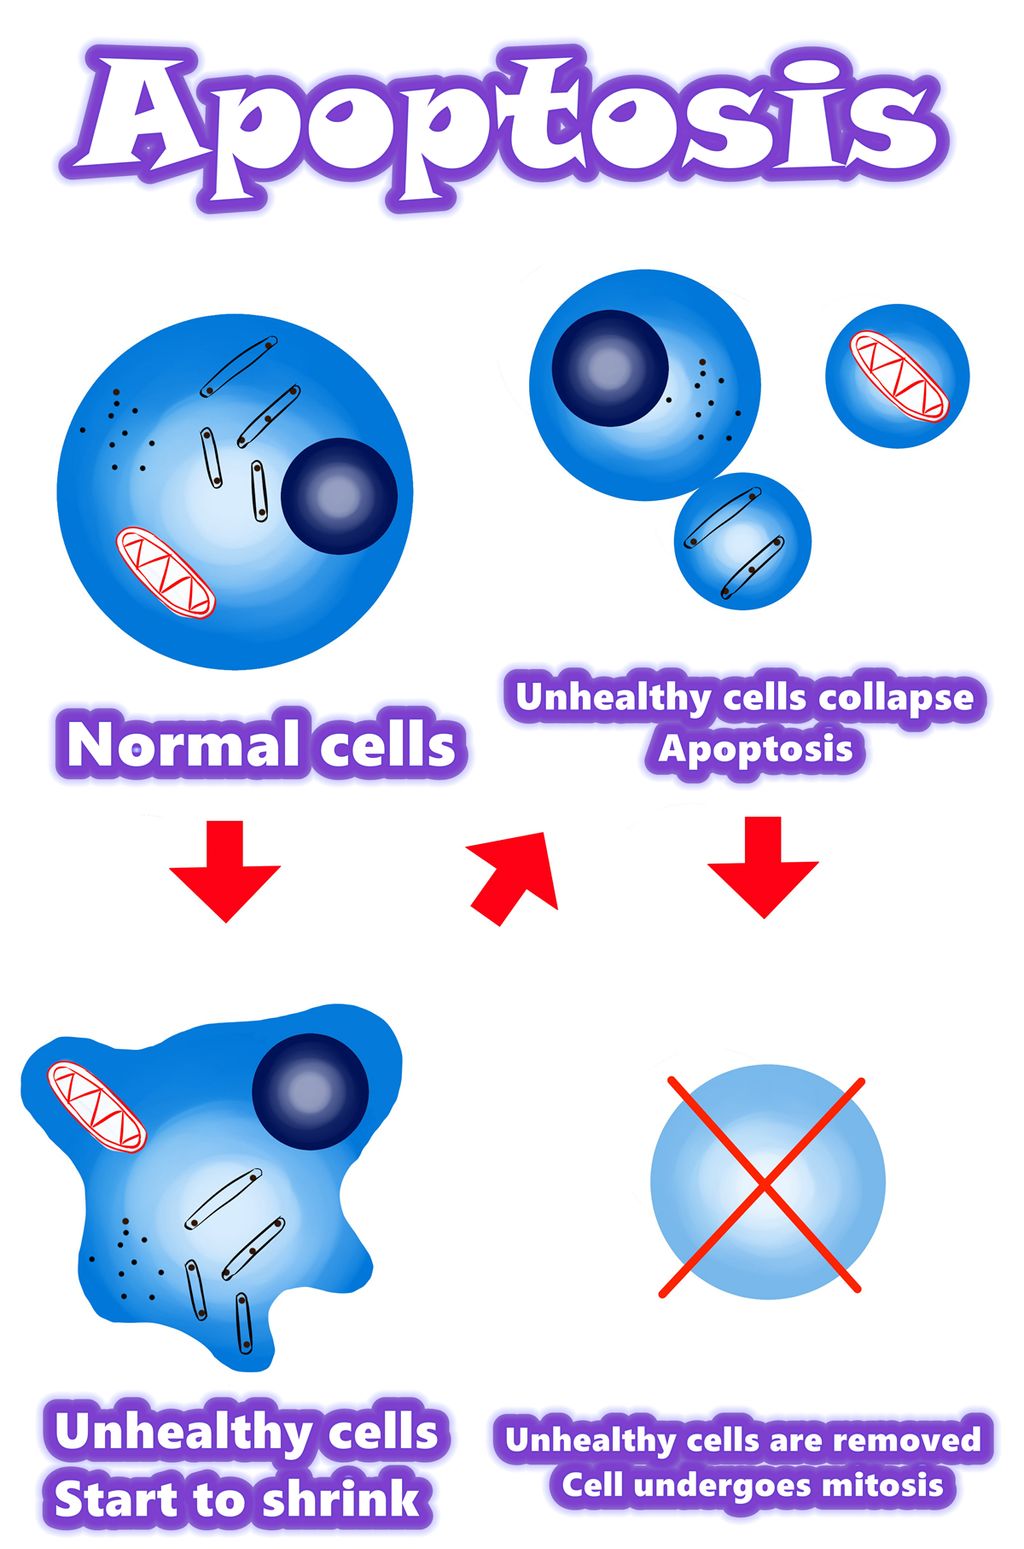 Solamargine | The best solution for cancer cells | Apoptosis vs Cancer cells | Apoptosis vs Abnormal cells | Apoptosis vs Mutant cells | Overview / Summary / Mechanism of apoptosis